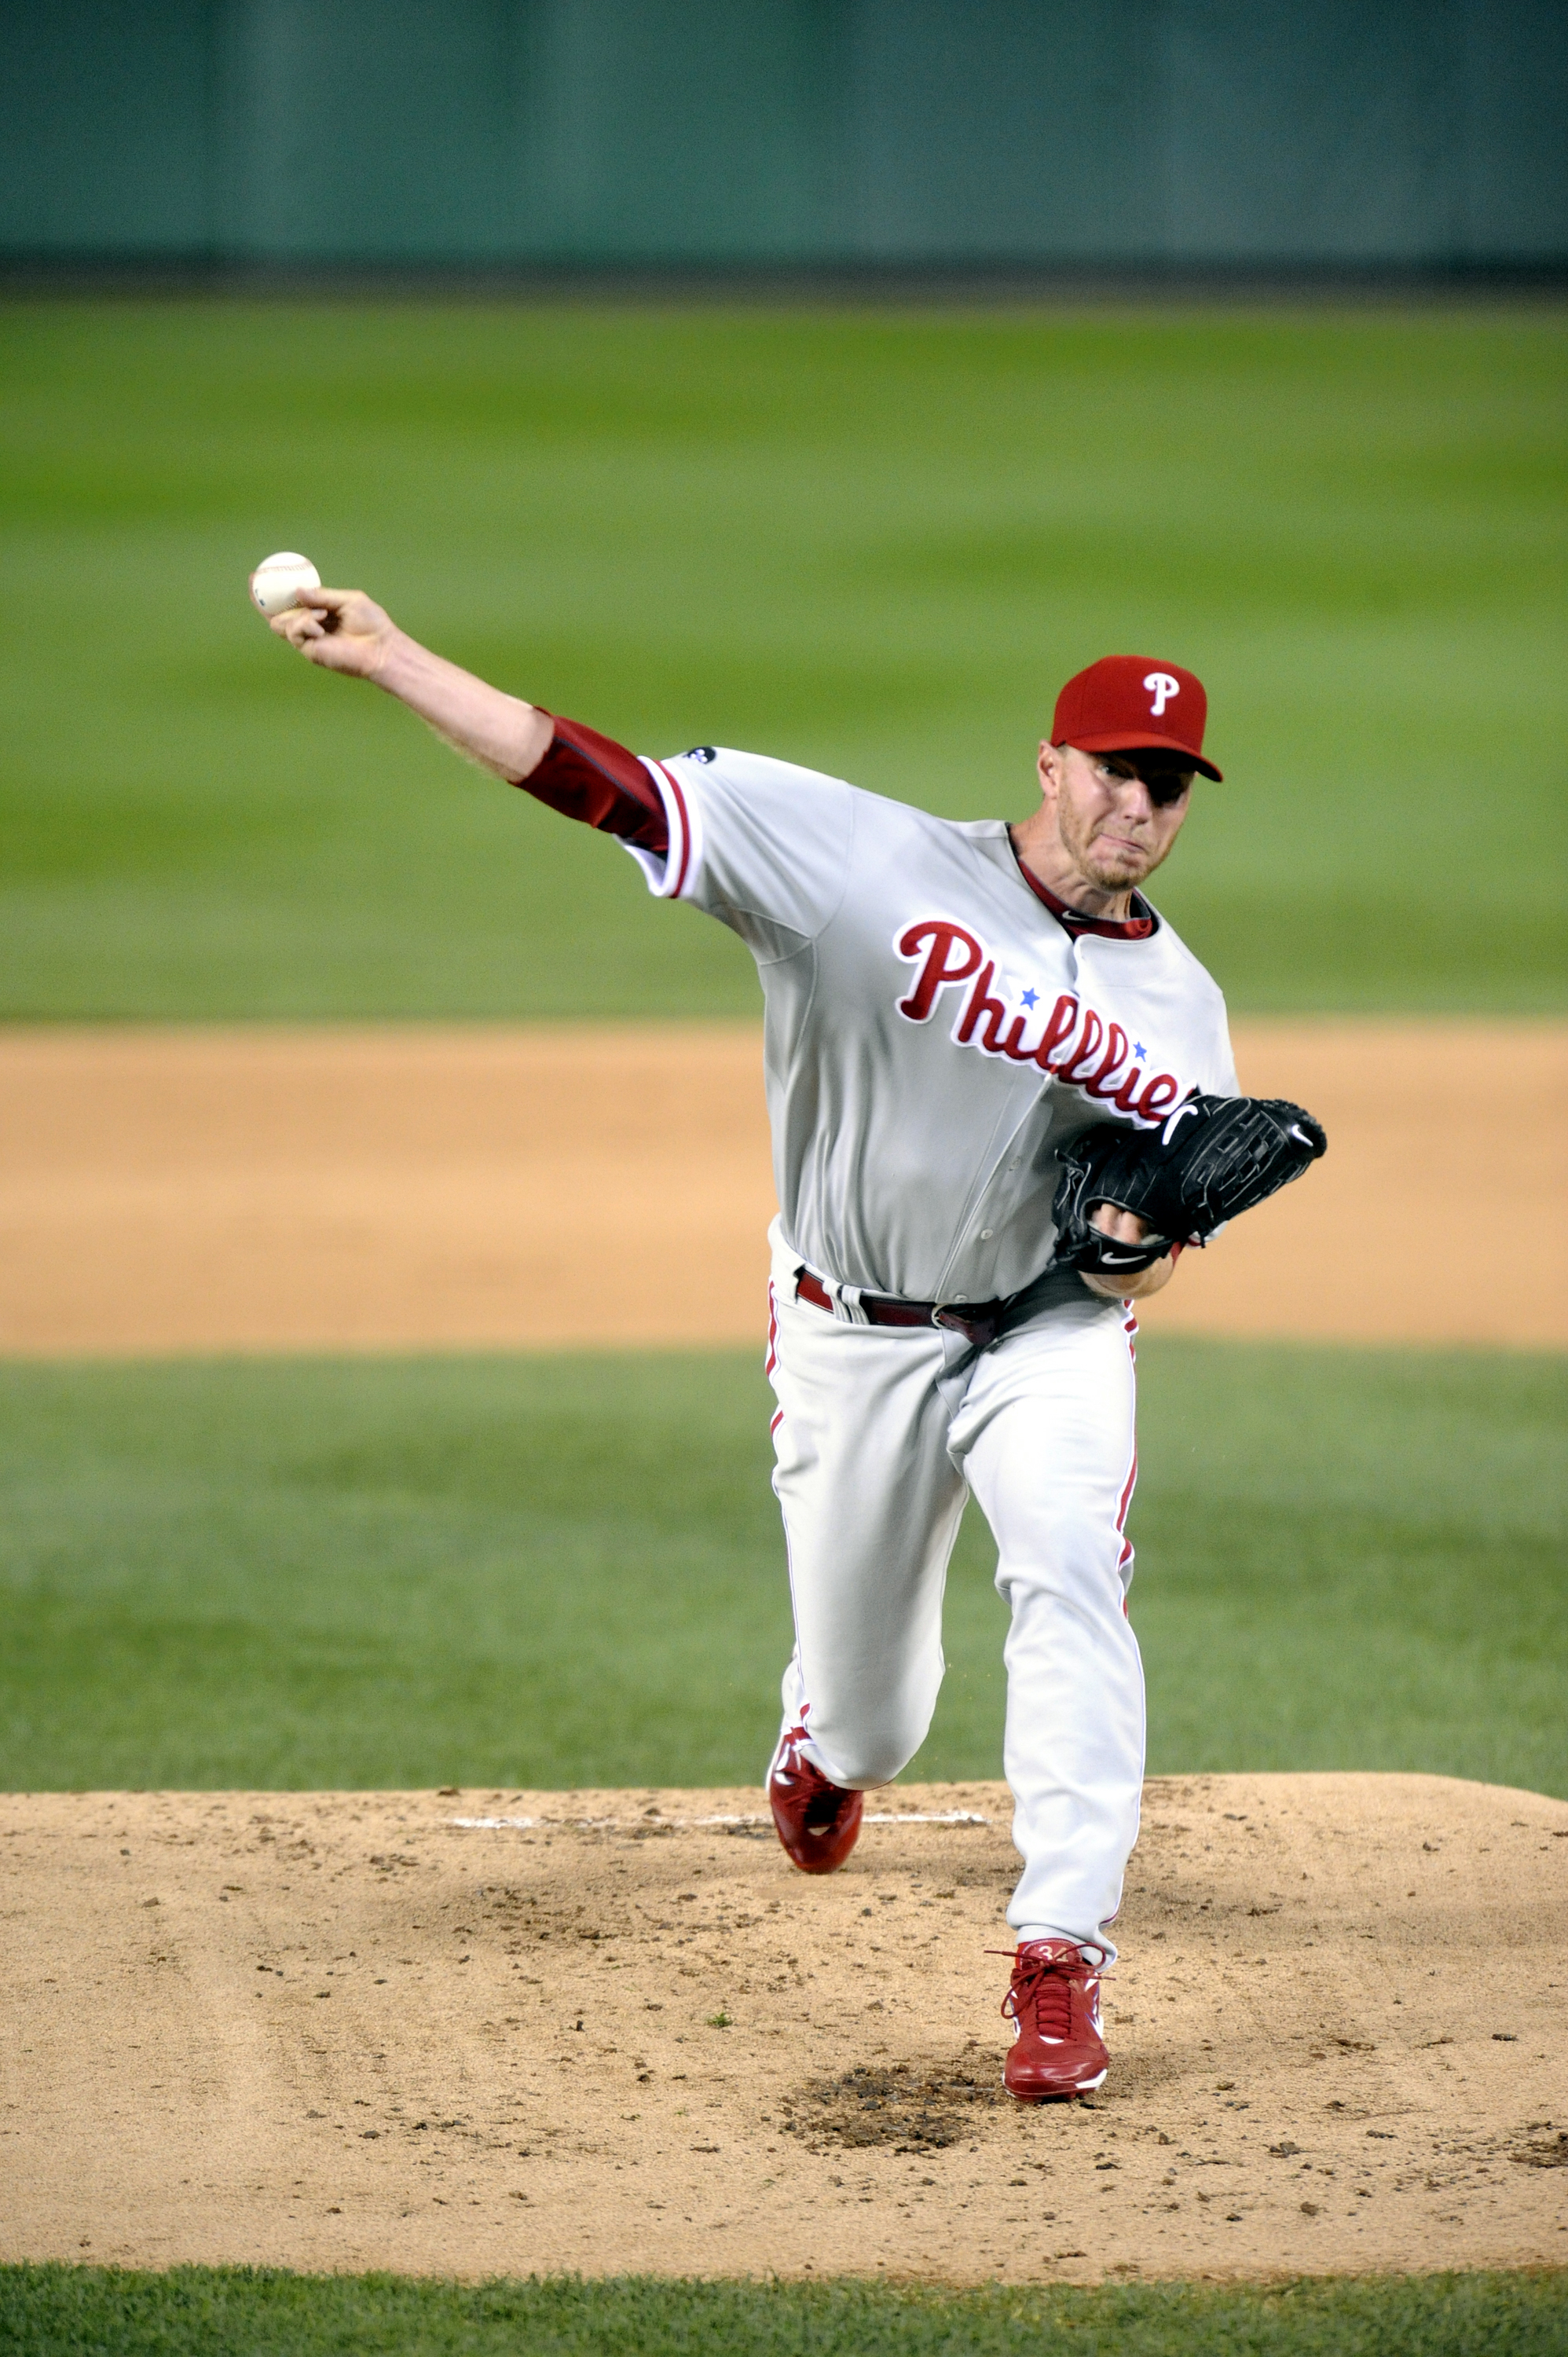 WASHINGTON - SEPTEMBER 27:  Roy Halliday #34 of the Philadelphia Phillies pitches during a baseball game against the Washington Nationals on September 27, 2010 at Nationals Park in Washington, D.C.    (Photo by Mitchell Layton/Getty Images)